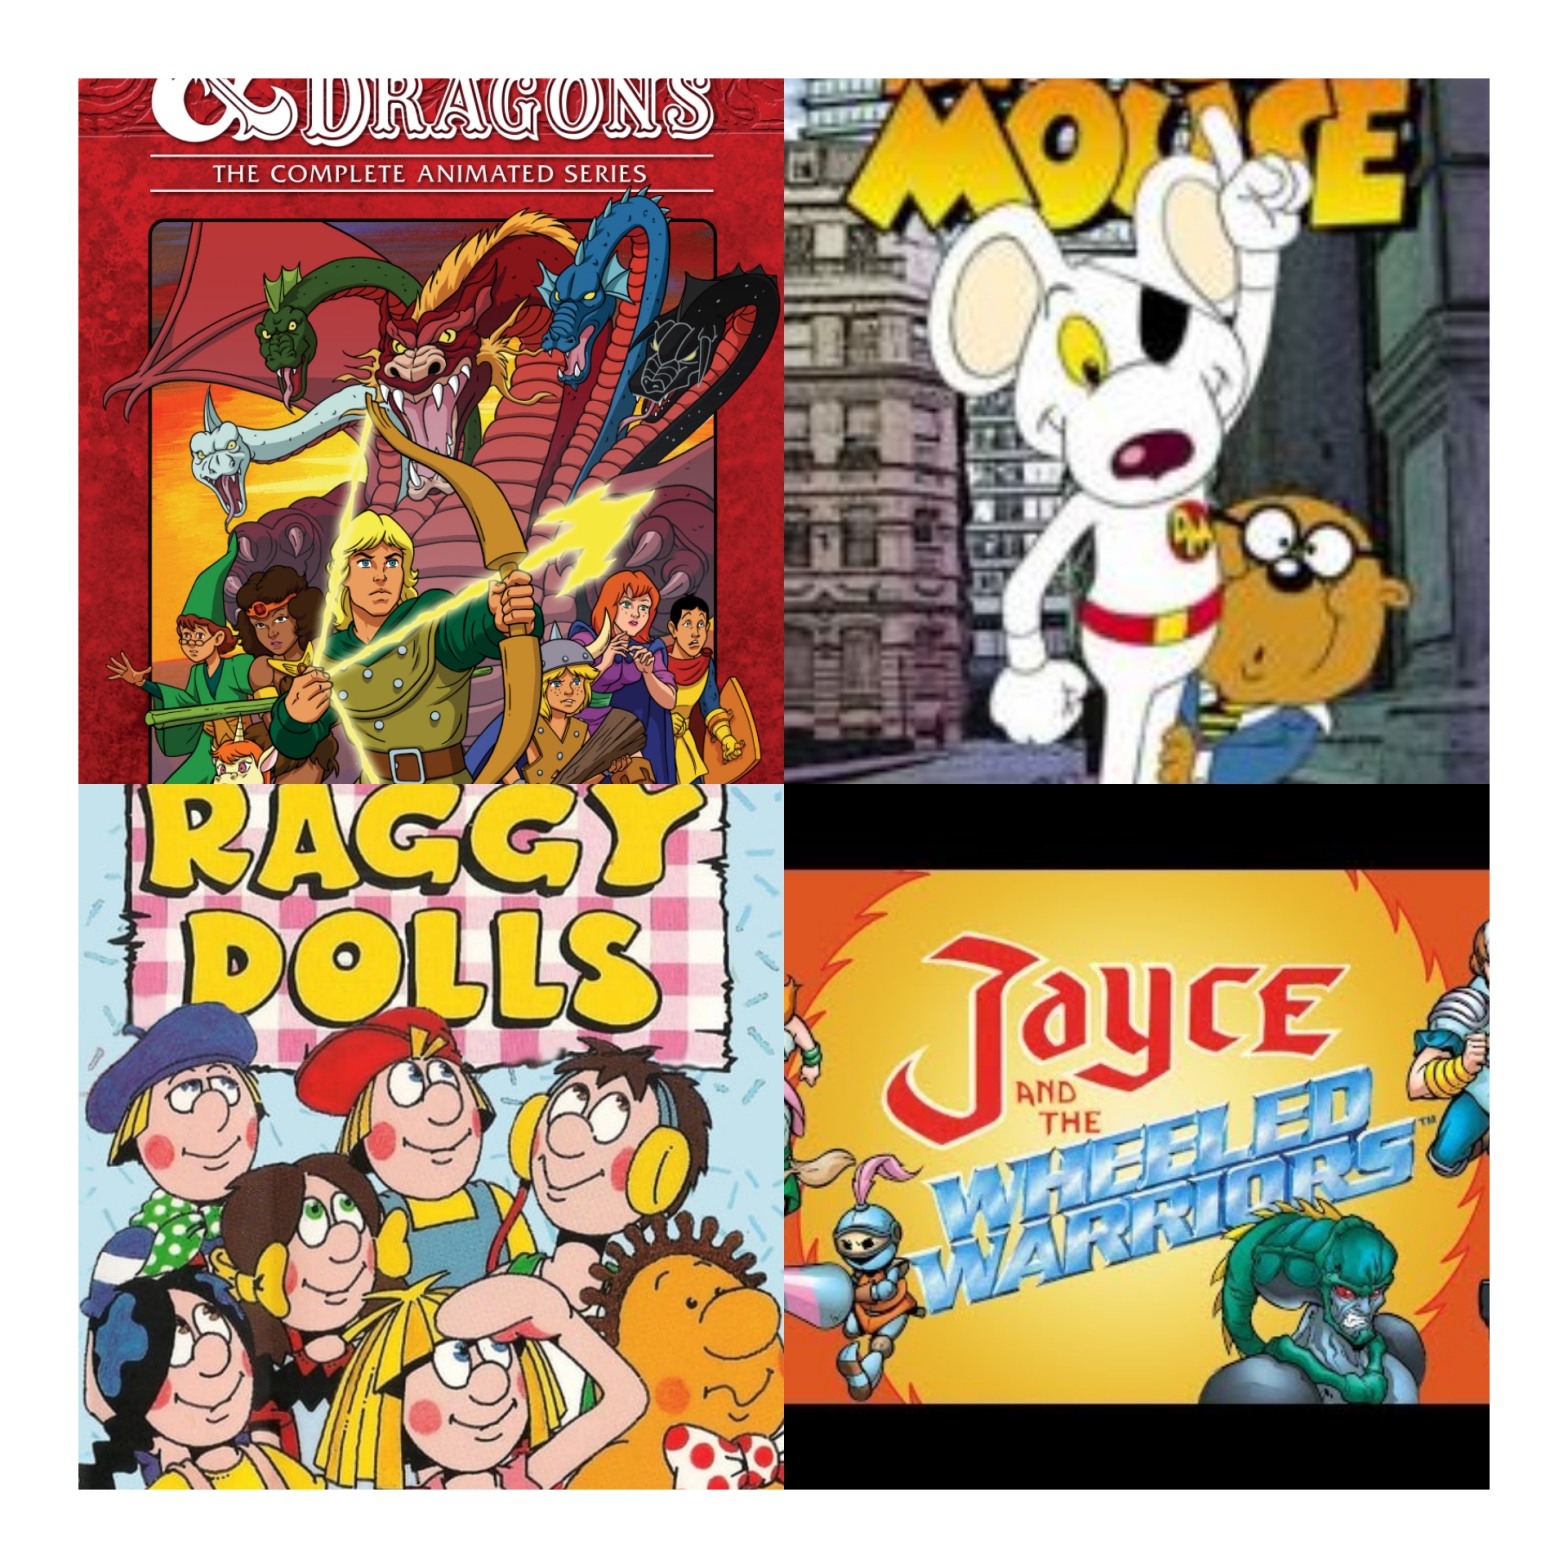 The Best Cartoon Themes I Could Think Of While I Ate Breakfast Part 2